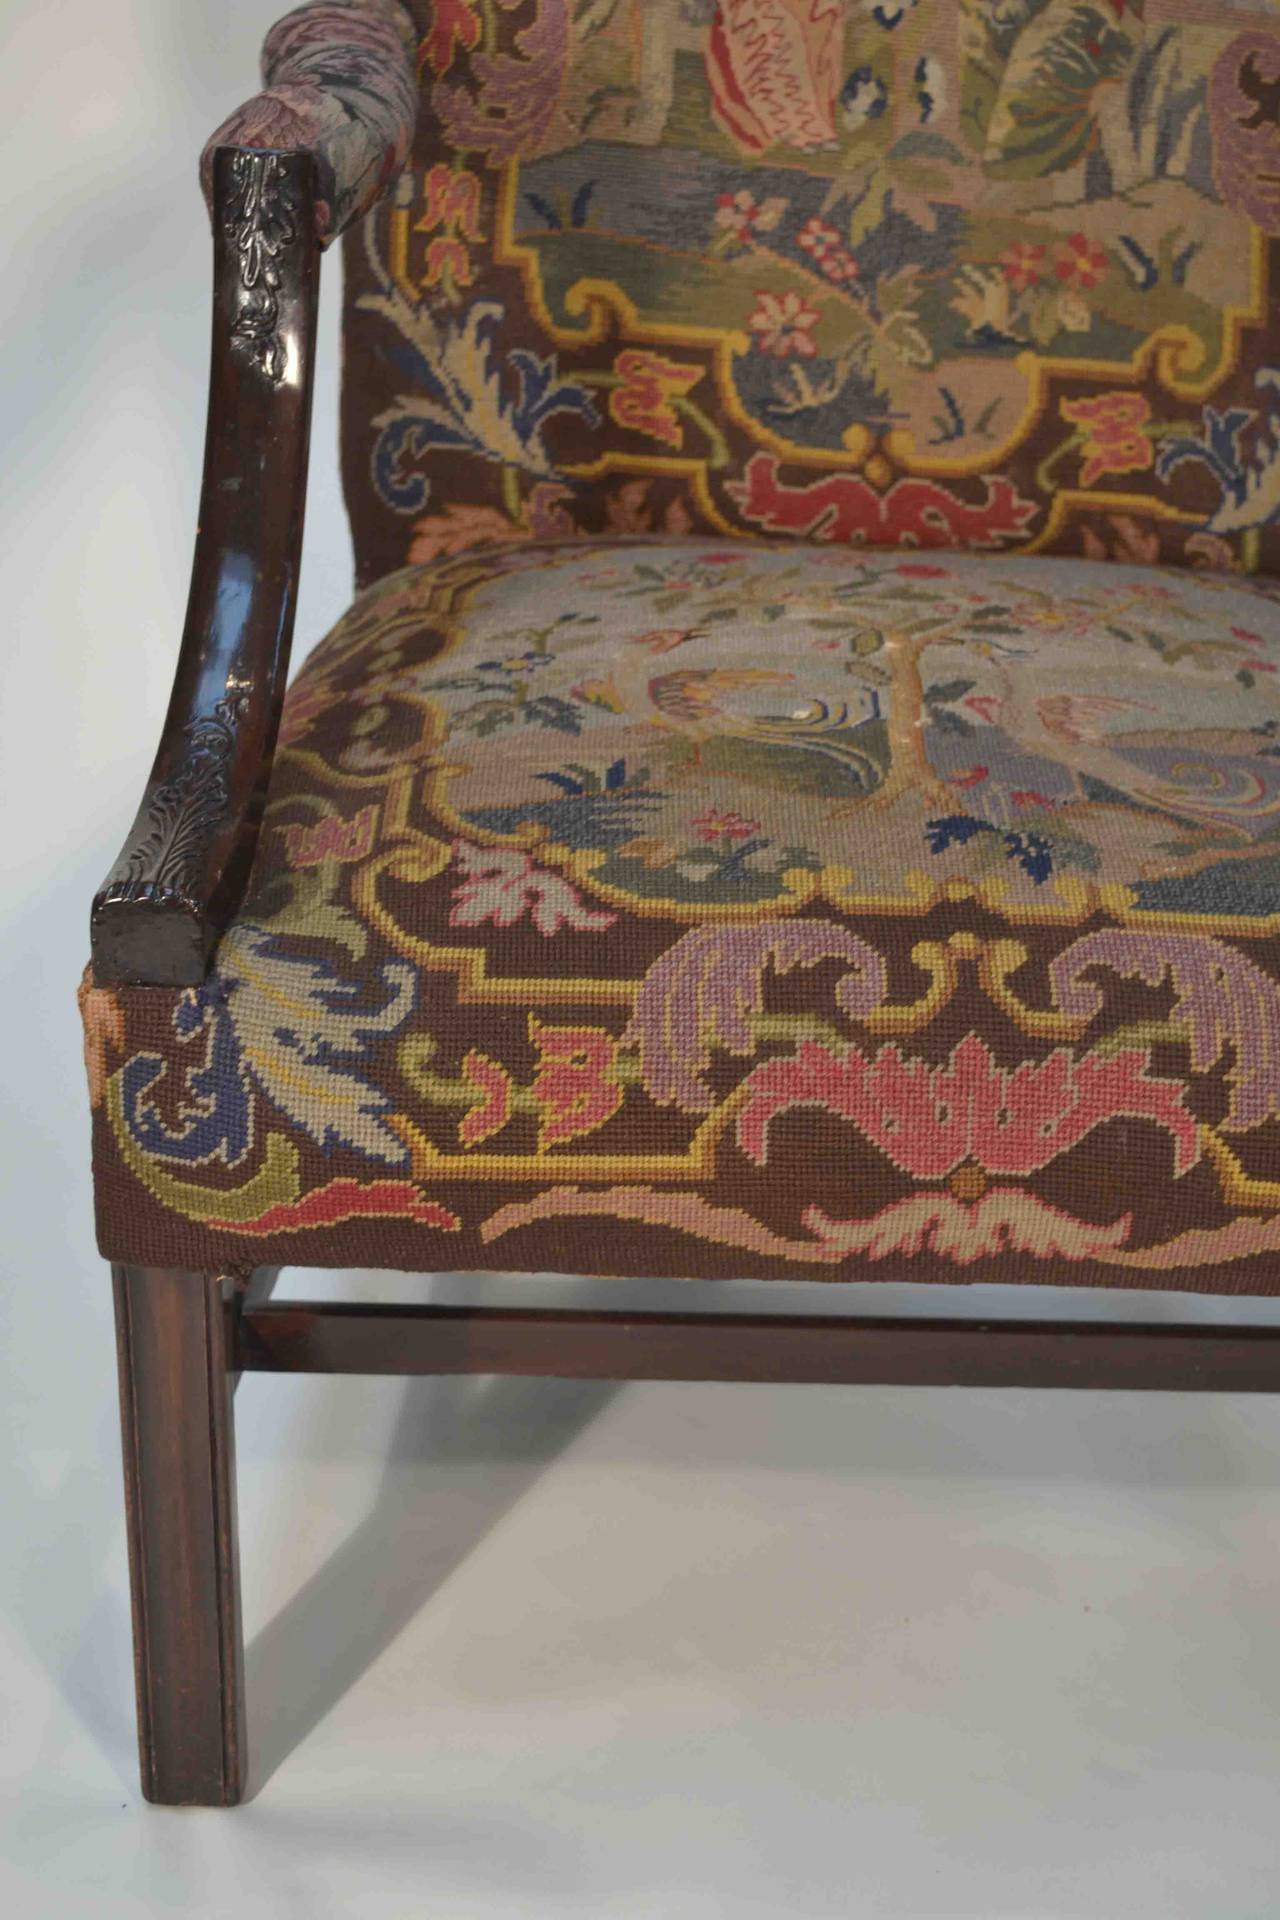 A fine large scale Chippendale style library chair from the mid to late 19thC; the front upholstered in gros and petite point needlework in an oriental design, all of which is in fine condition;  the back of the chair is upholstered in an oyster